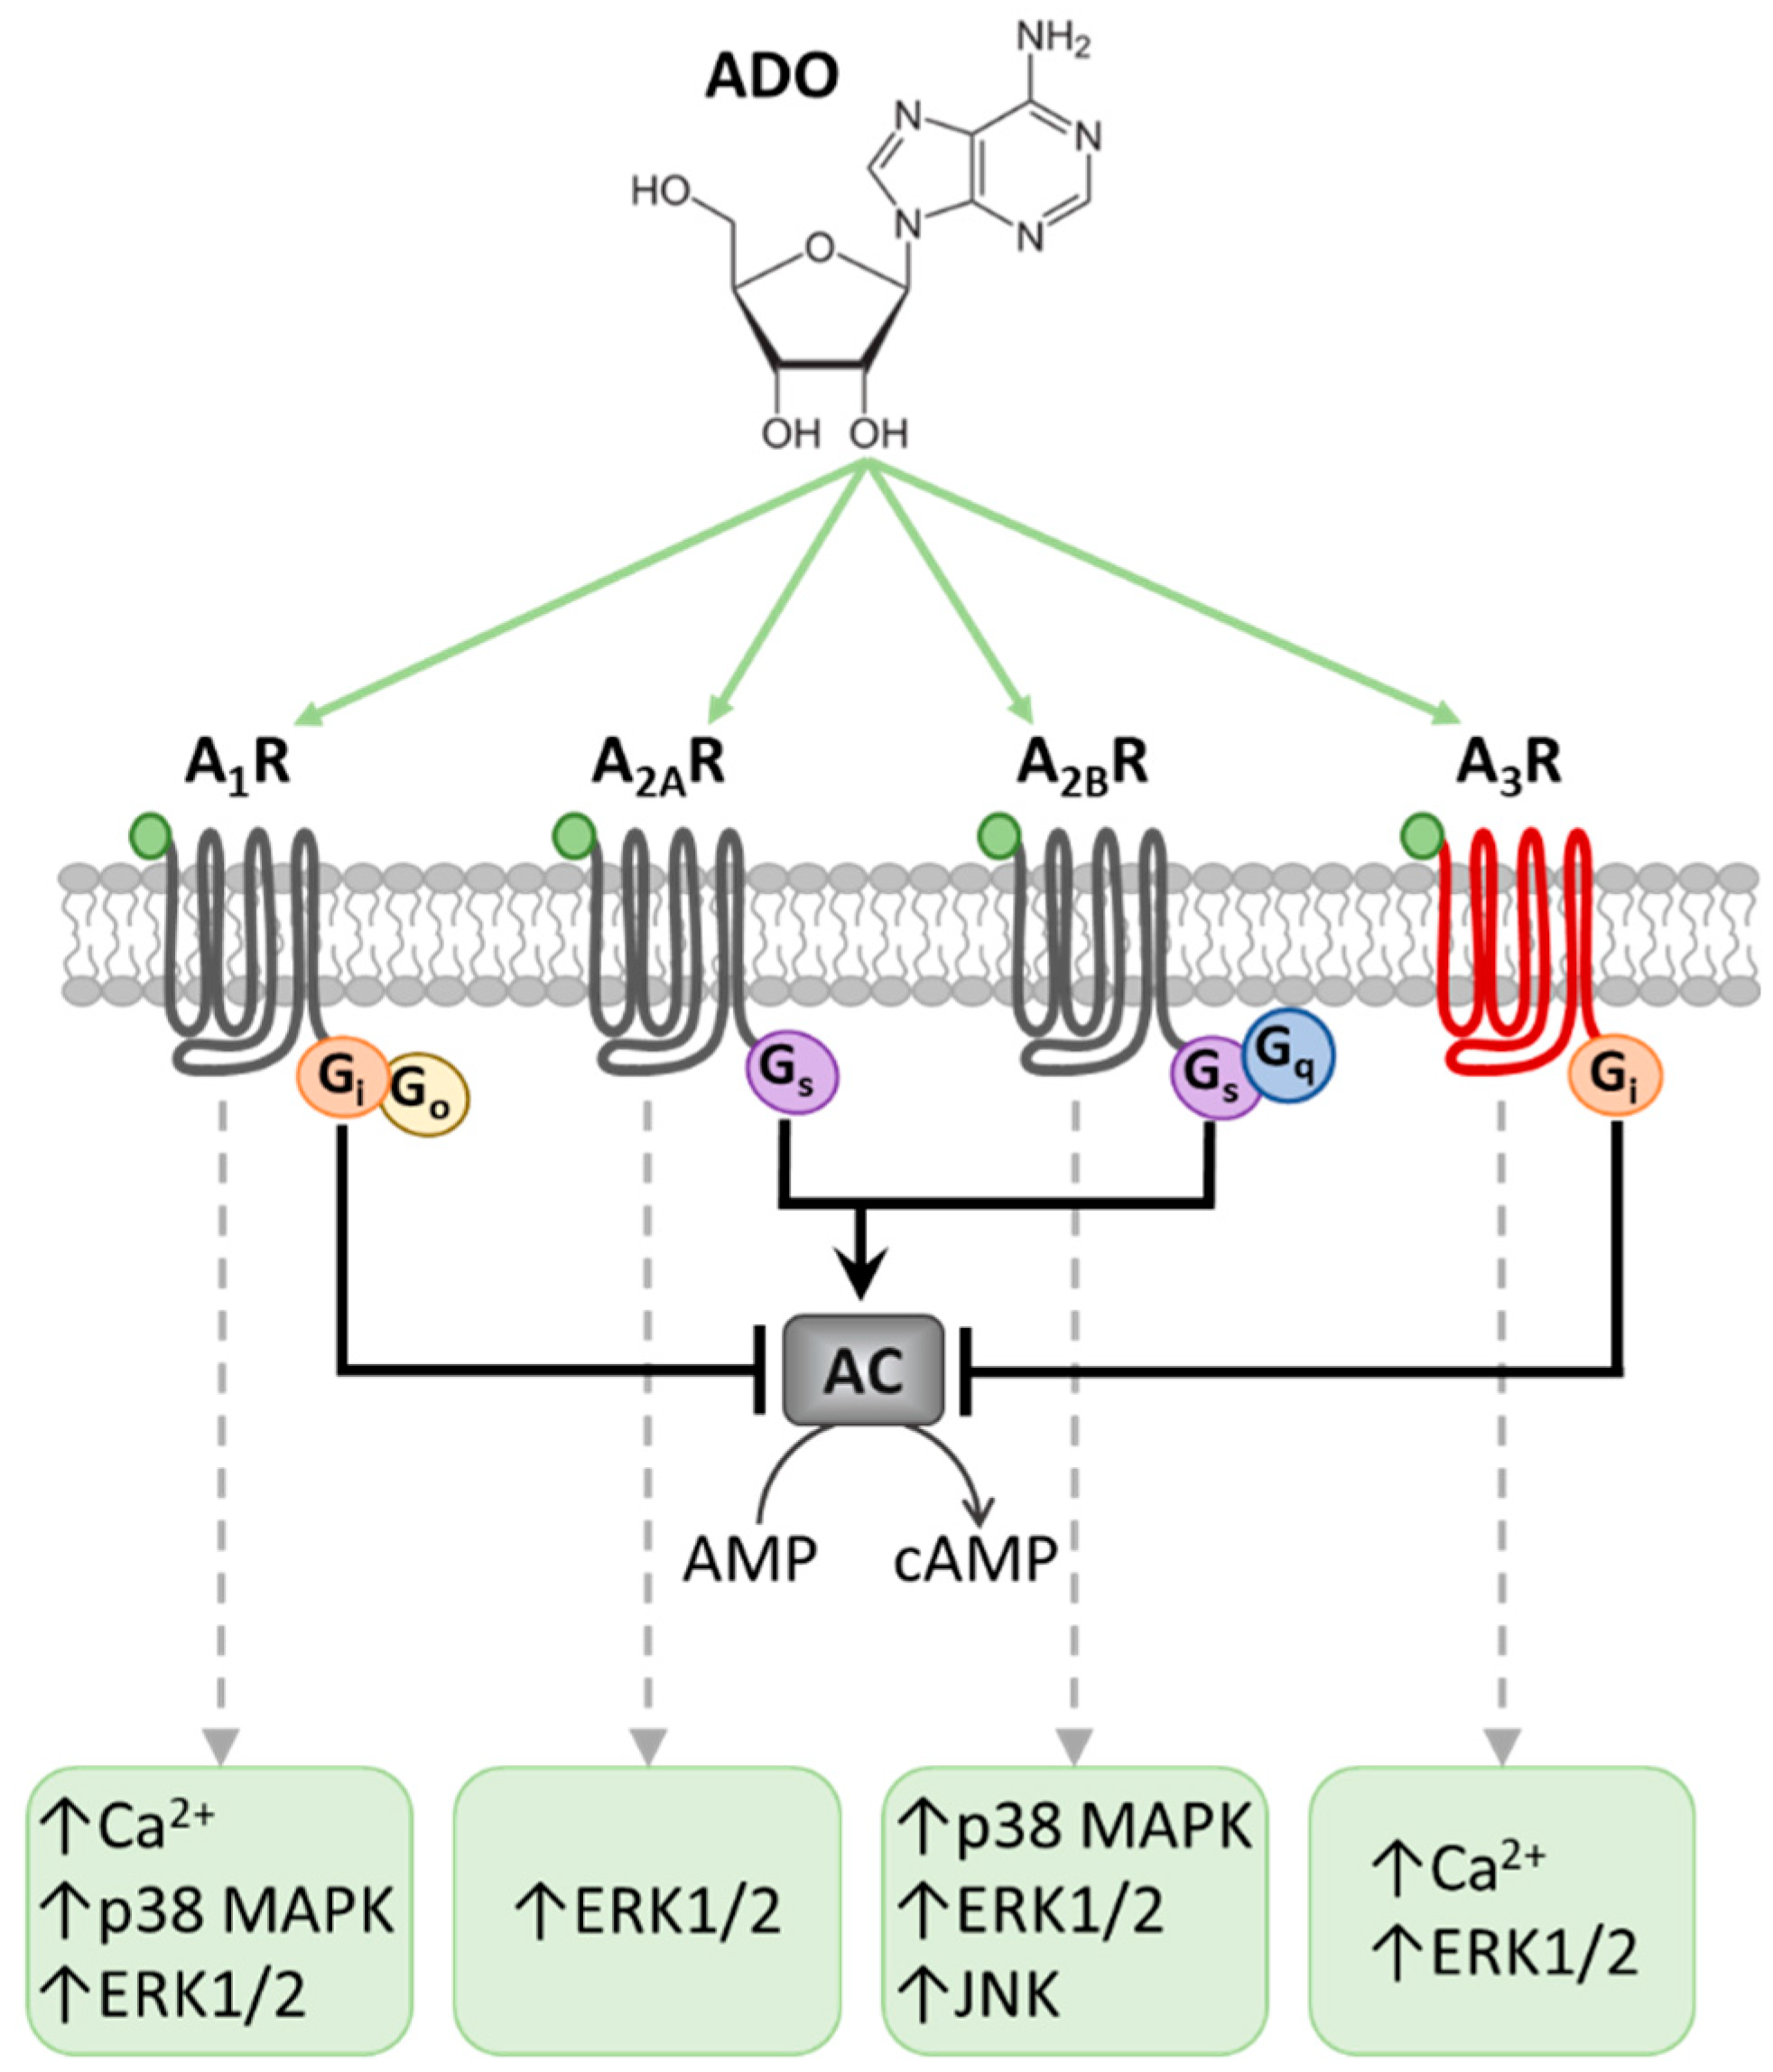 IJMS | Free Full-Text | Uncovering the Mechanisms of Adenosine  Receptor-Mediated Pain Control: Focus on the A3 Receptor Subtype | HTML